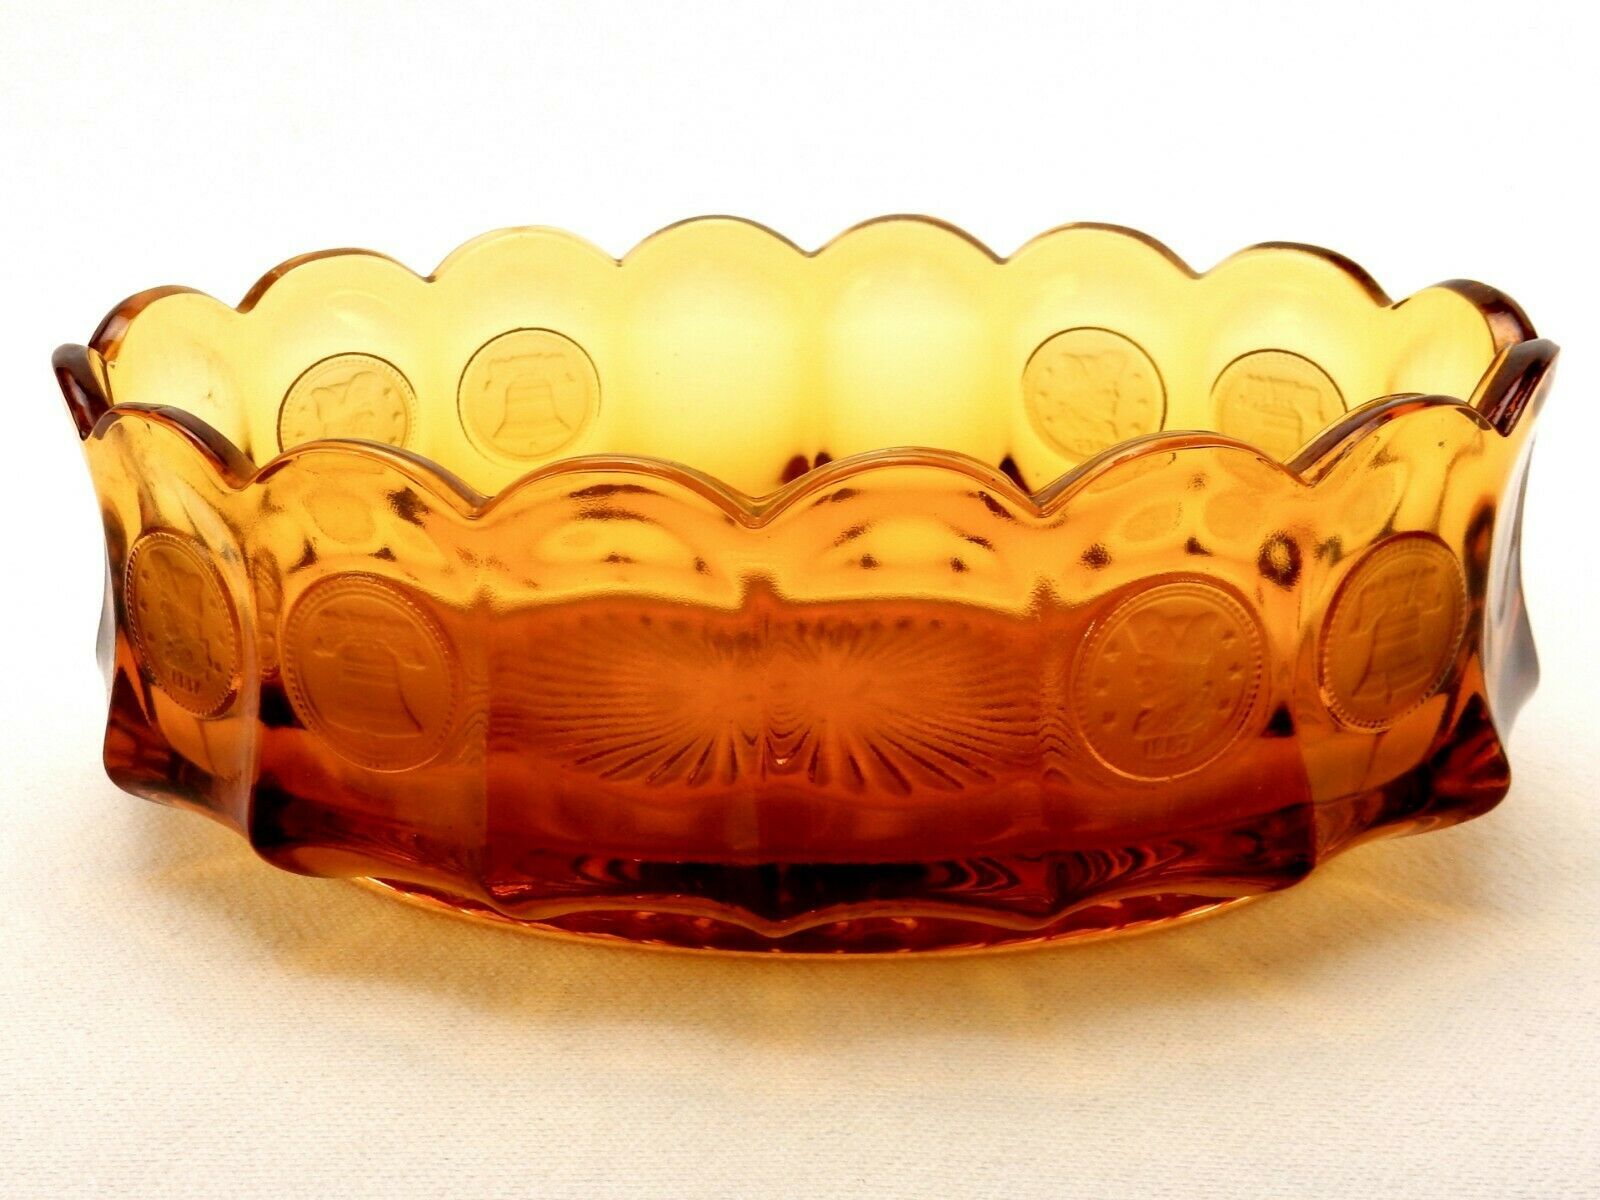 Primary image for Fostoria Honey Amber Coin Glass Oval Serving Bowl, 9" x 5", 16 Panels, Scalloped